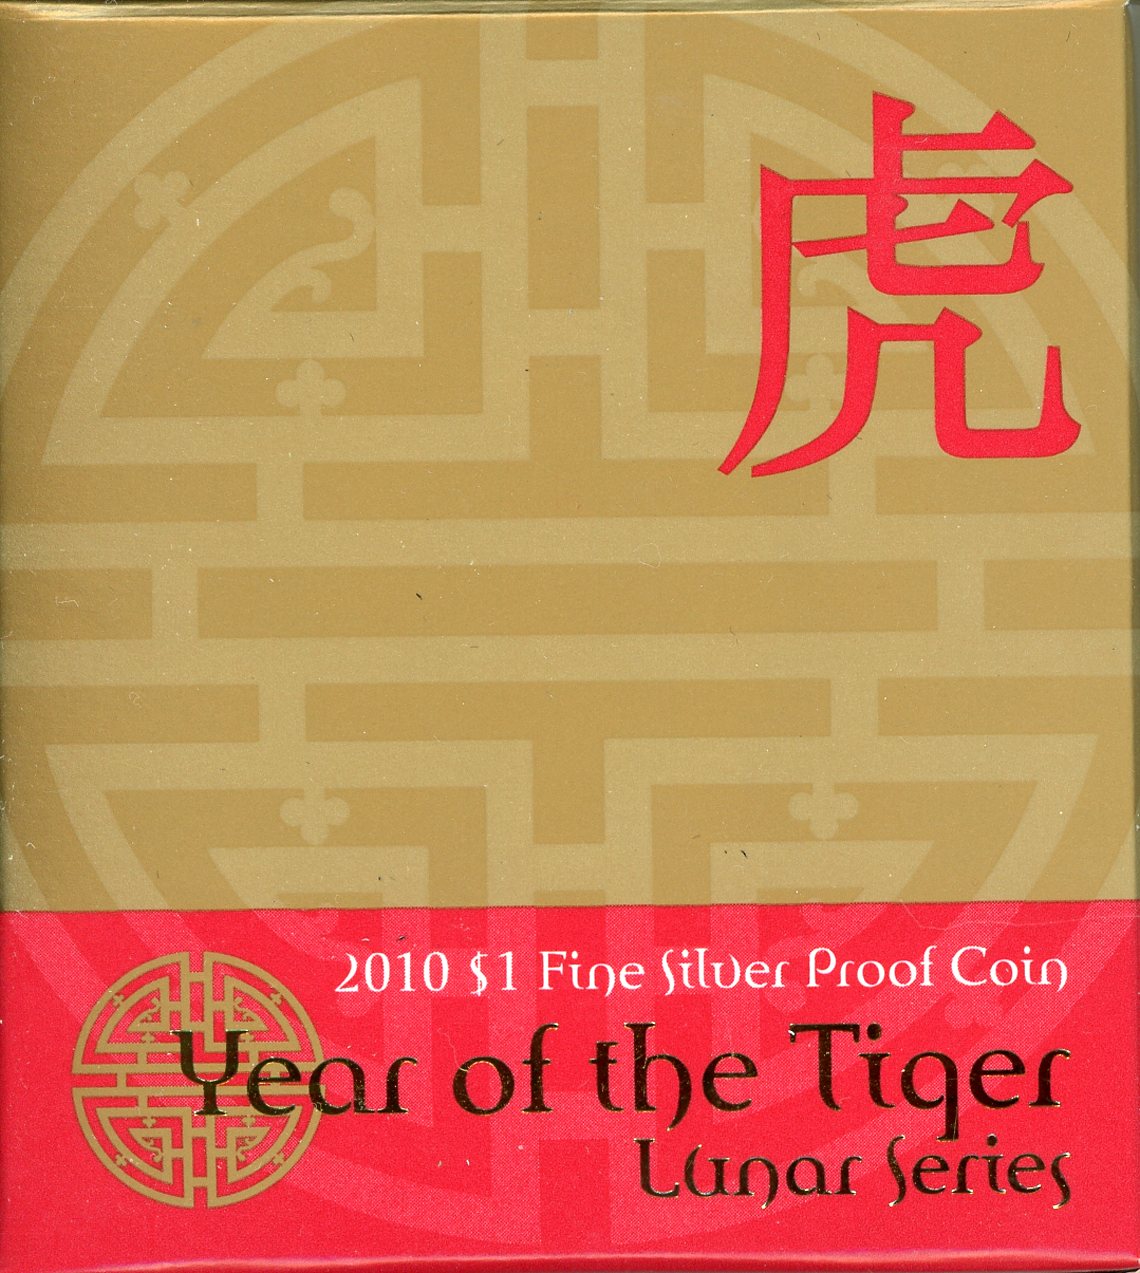 Thumbnail for 2010 Lunar Series - Year of the Tiger $1 Silver Proof Coin